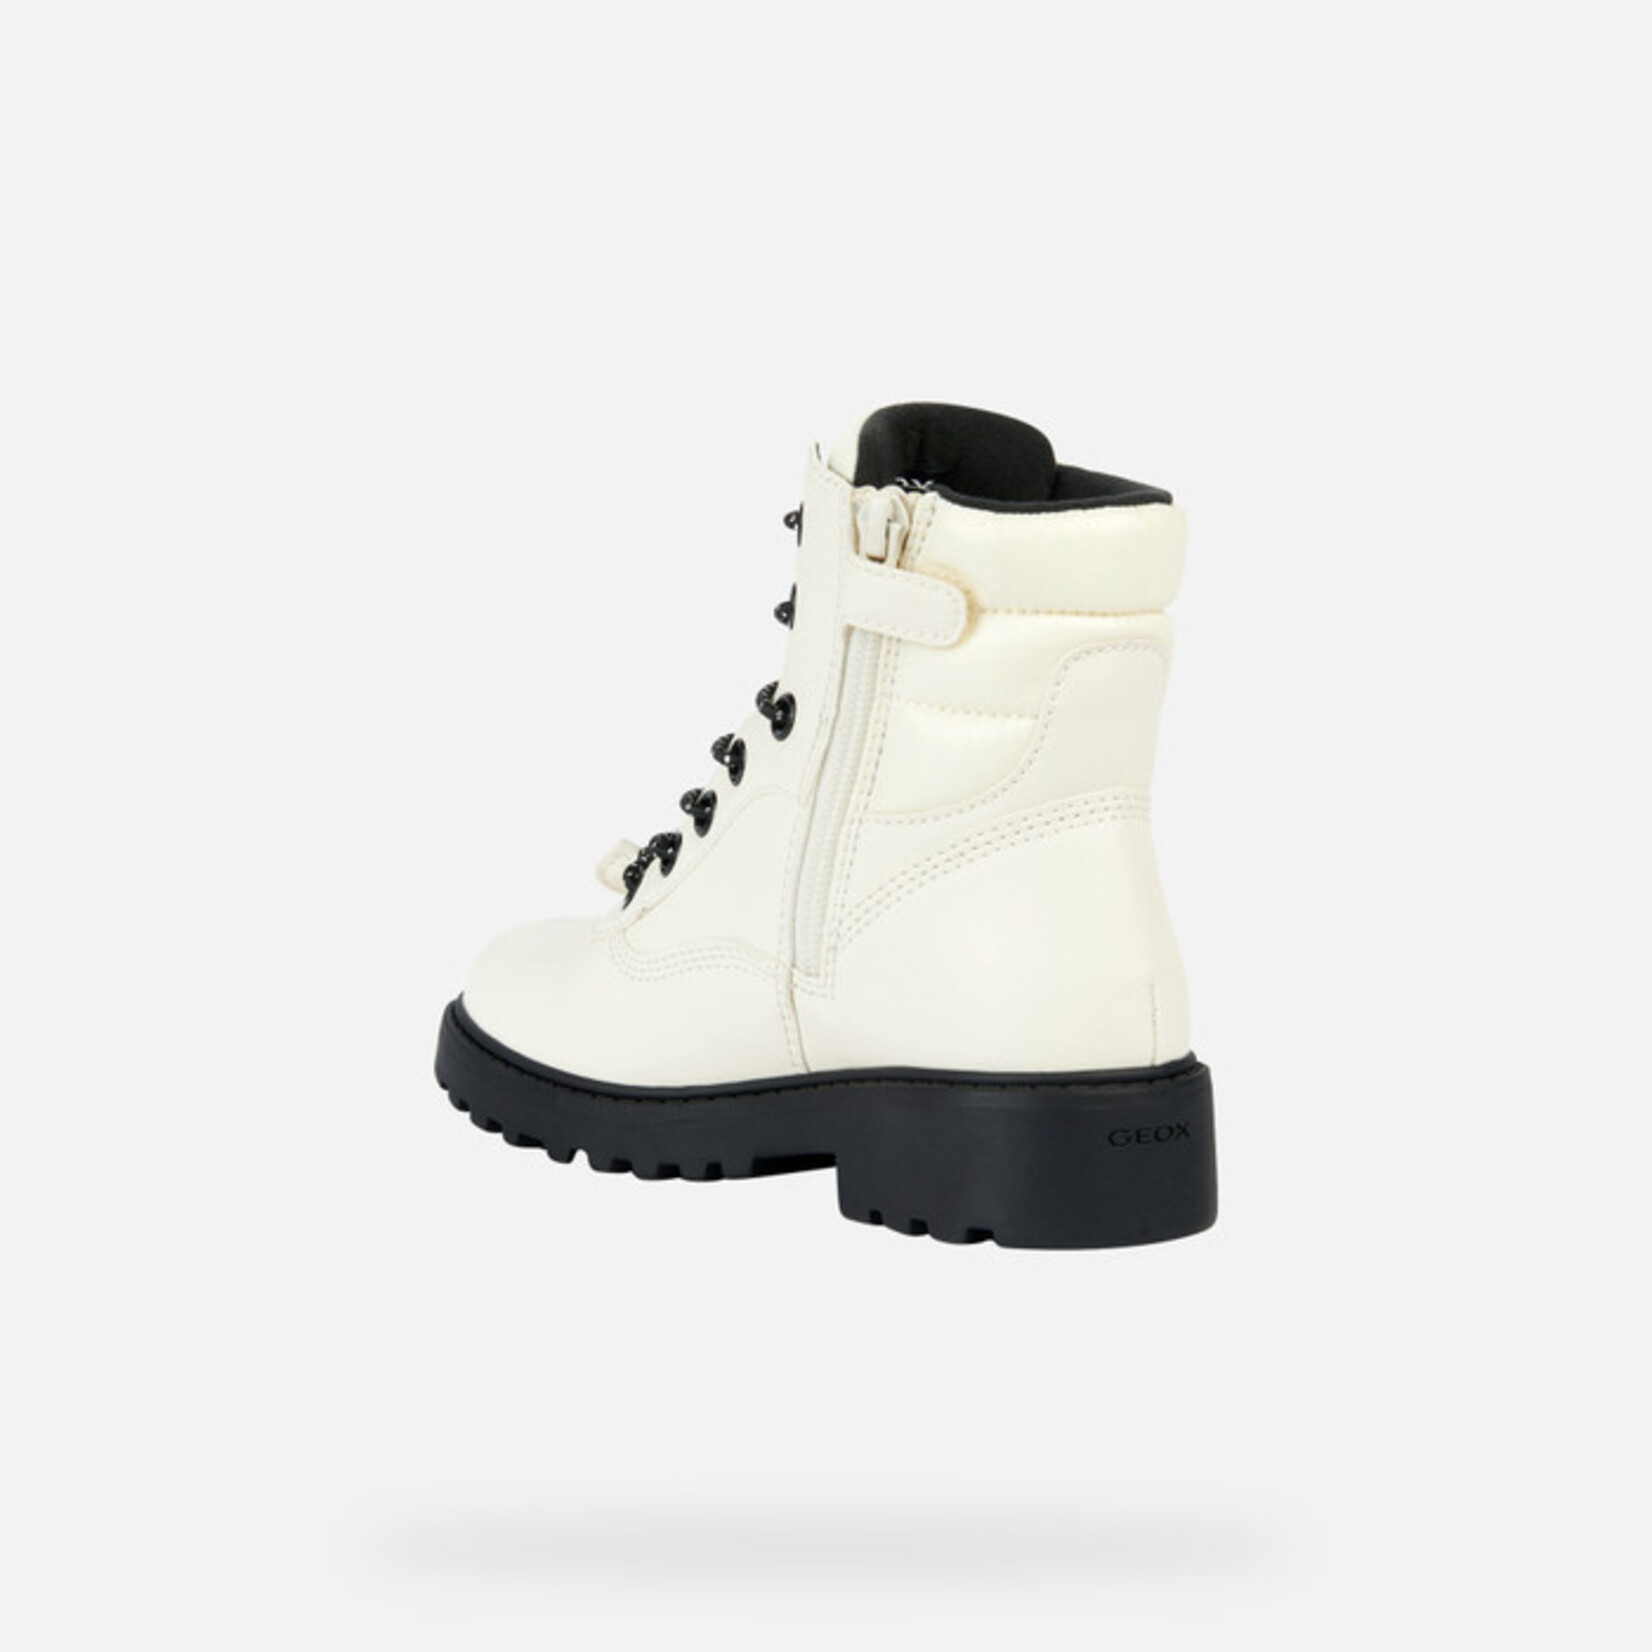 Geox Geox Casey Ankle Boot Light Ivory/Black